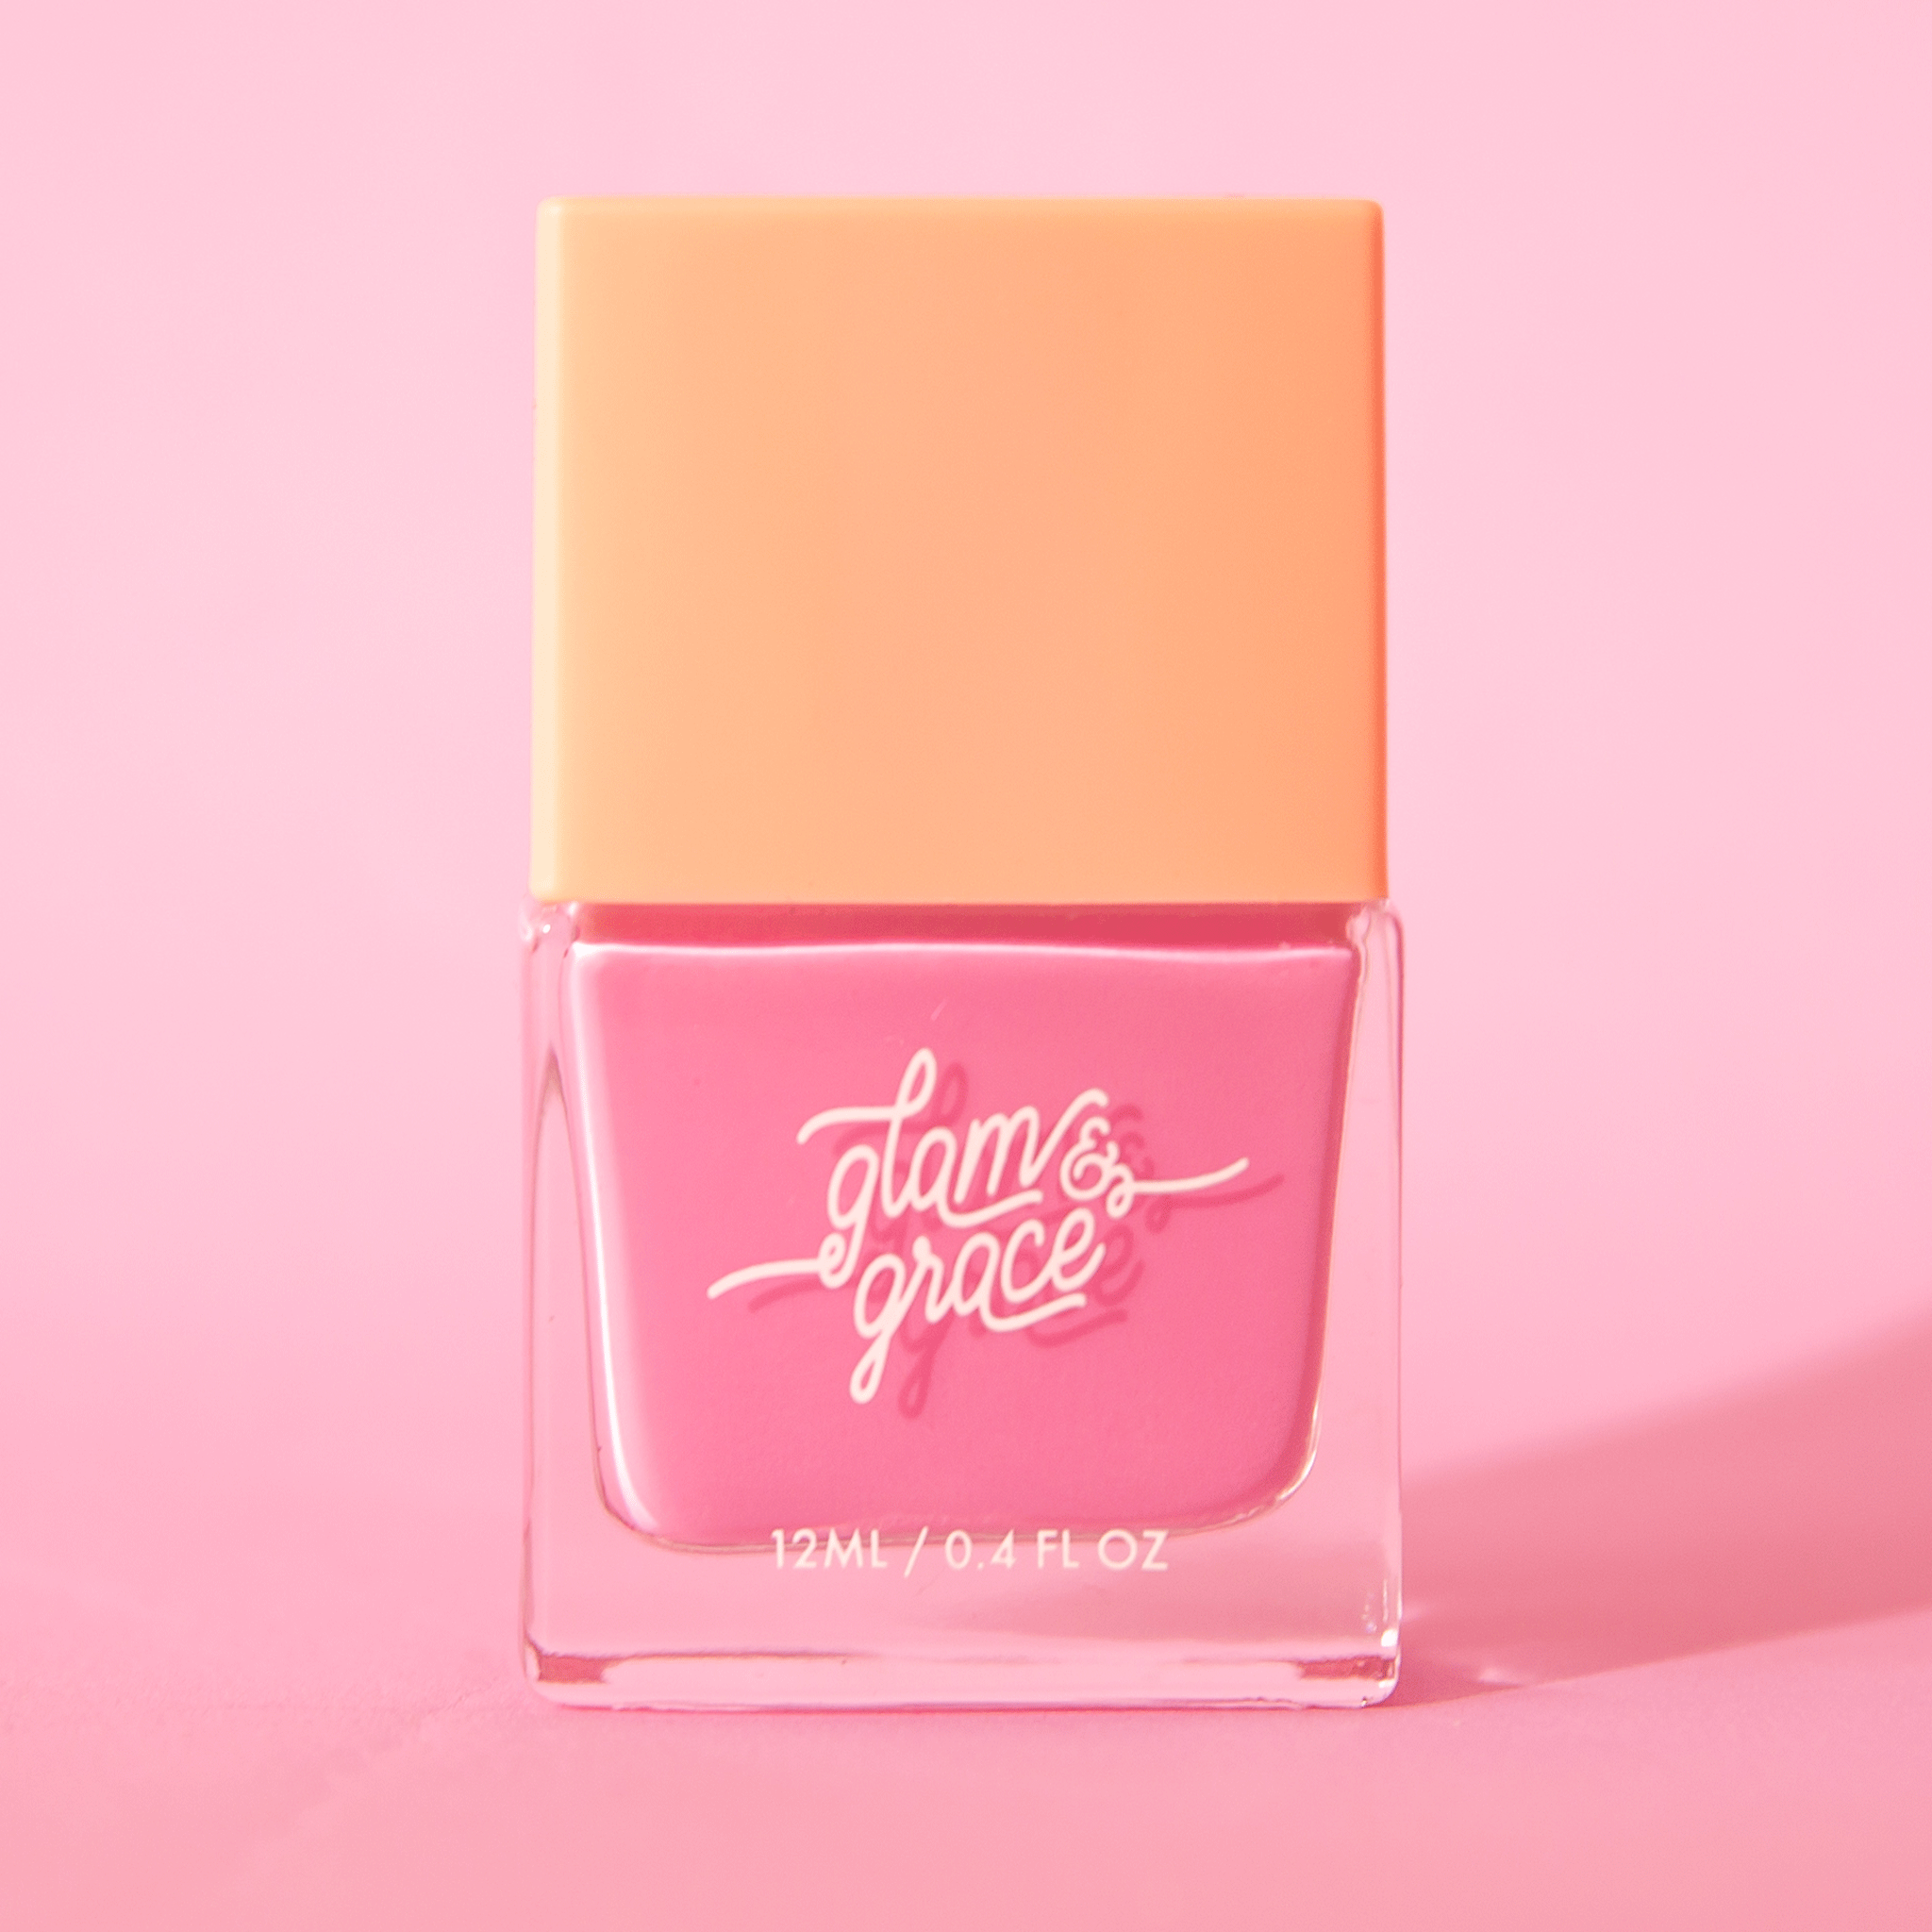 On a pink background is a square nail polish bottle with a bright pink nail polish inside